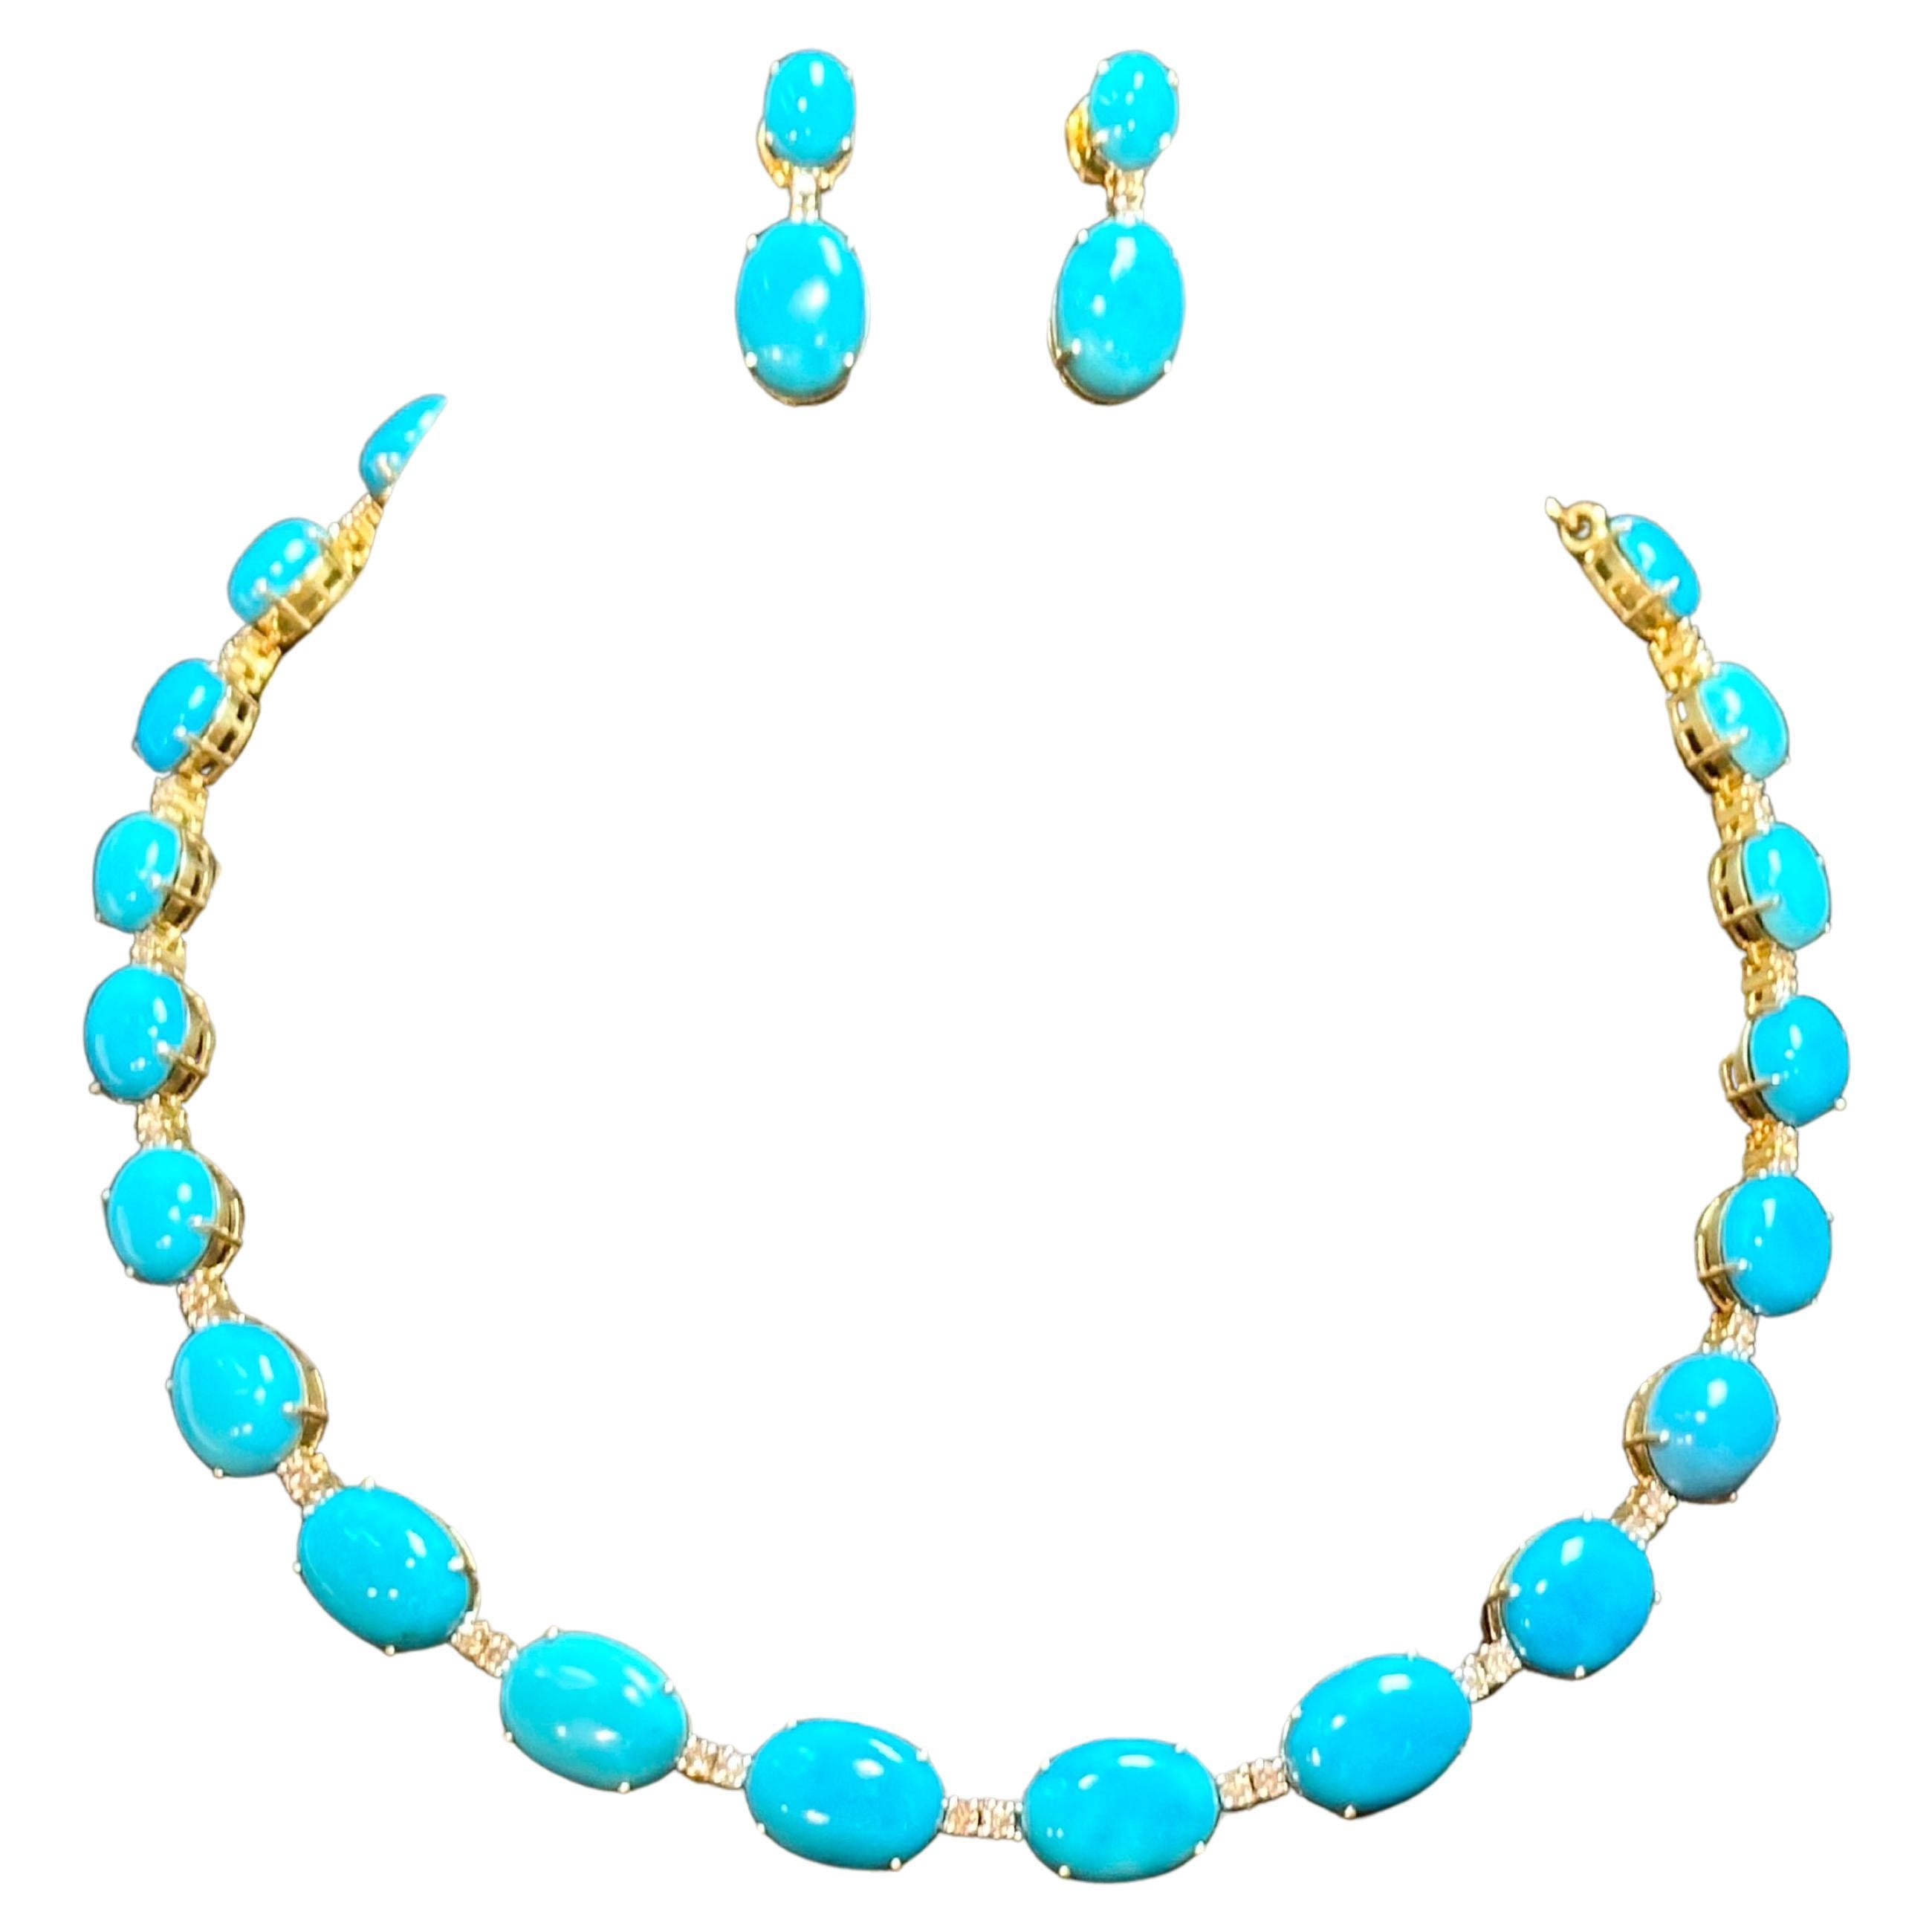 This Natural Sleeping Beauty Turquoise & Diamond Tennis Necklace & Earrings Set is a true masterpiece that showcases the exceptional quality and color of Sleeping Beauty Turquoise. The necklace features 19 stones of oval Sleeping Beauty Turquoise,